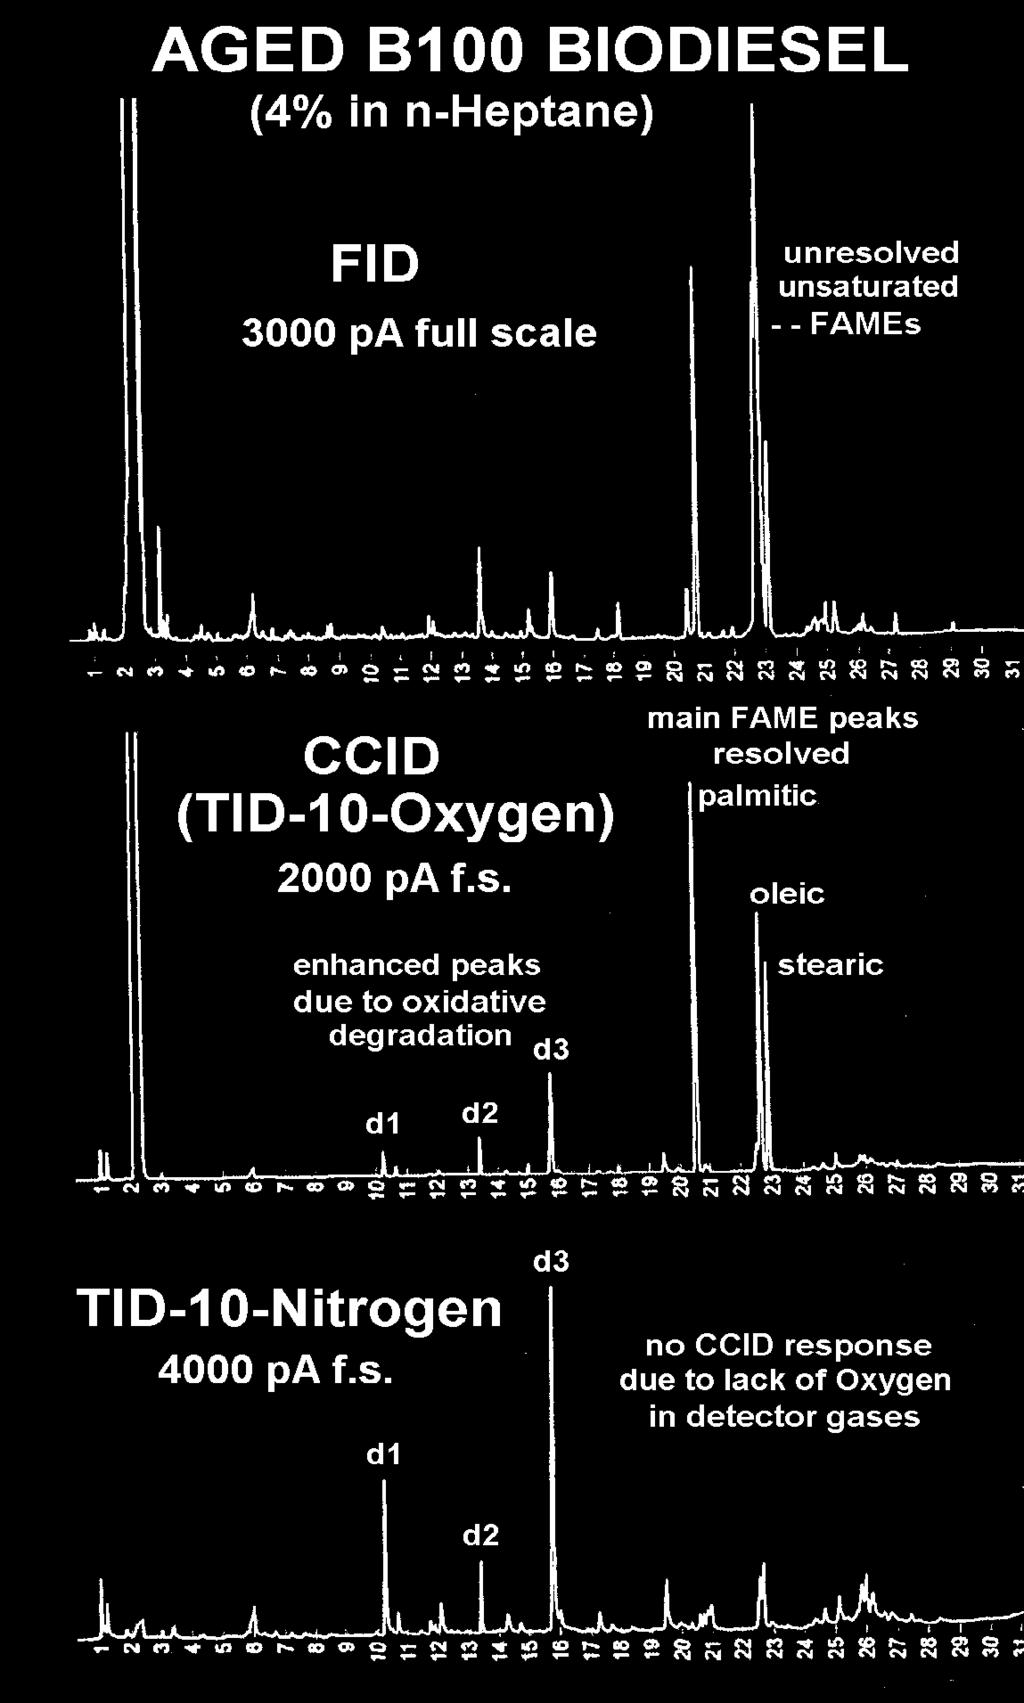 Figure 3 compares FID, CCID, and TID-1-Nitrogen chromatograms for a sample of B20 Biodiesel prepared as a dilution in Methylene Chloride.